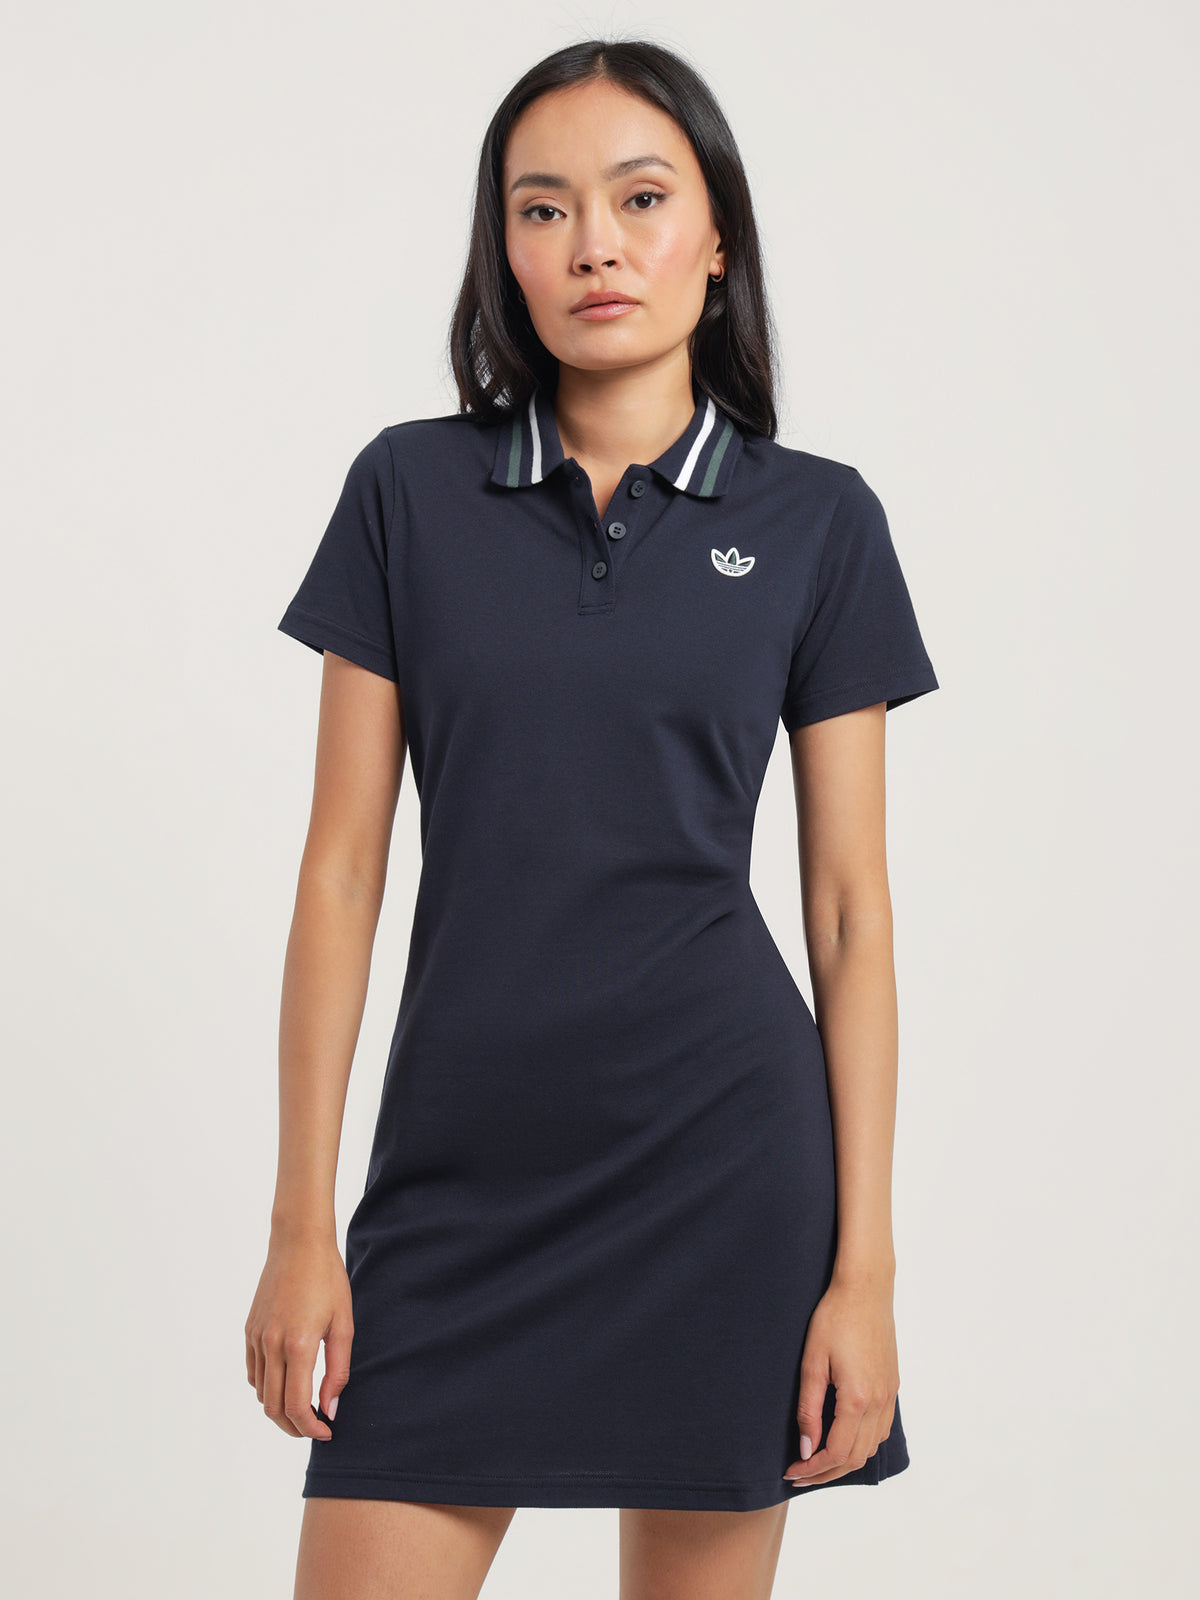 Originals Class of 72 Polo Dress in Ink